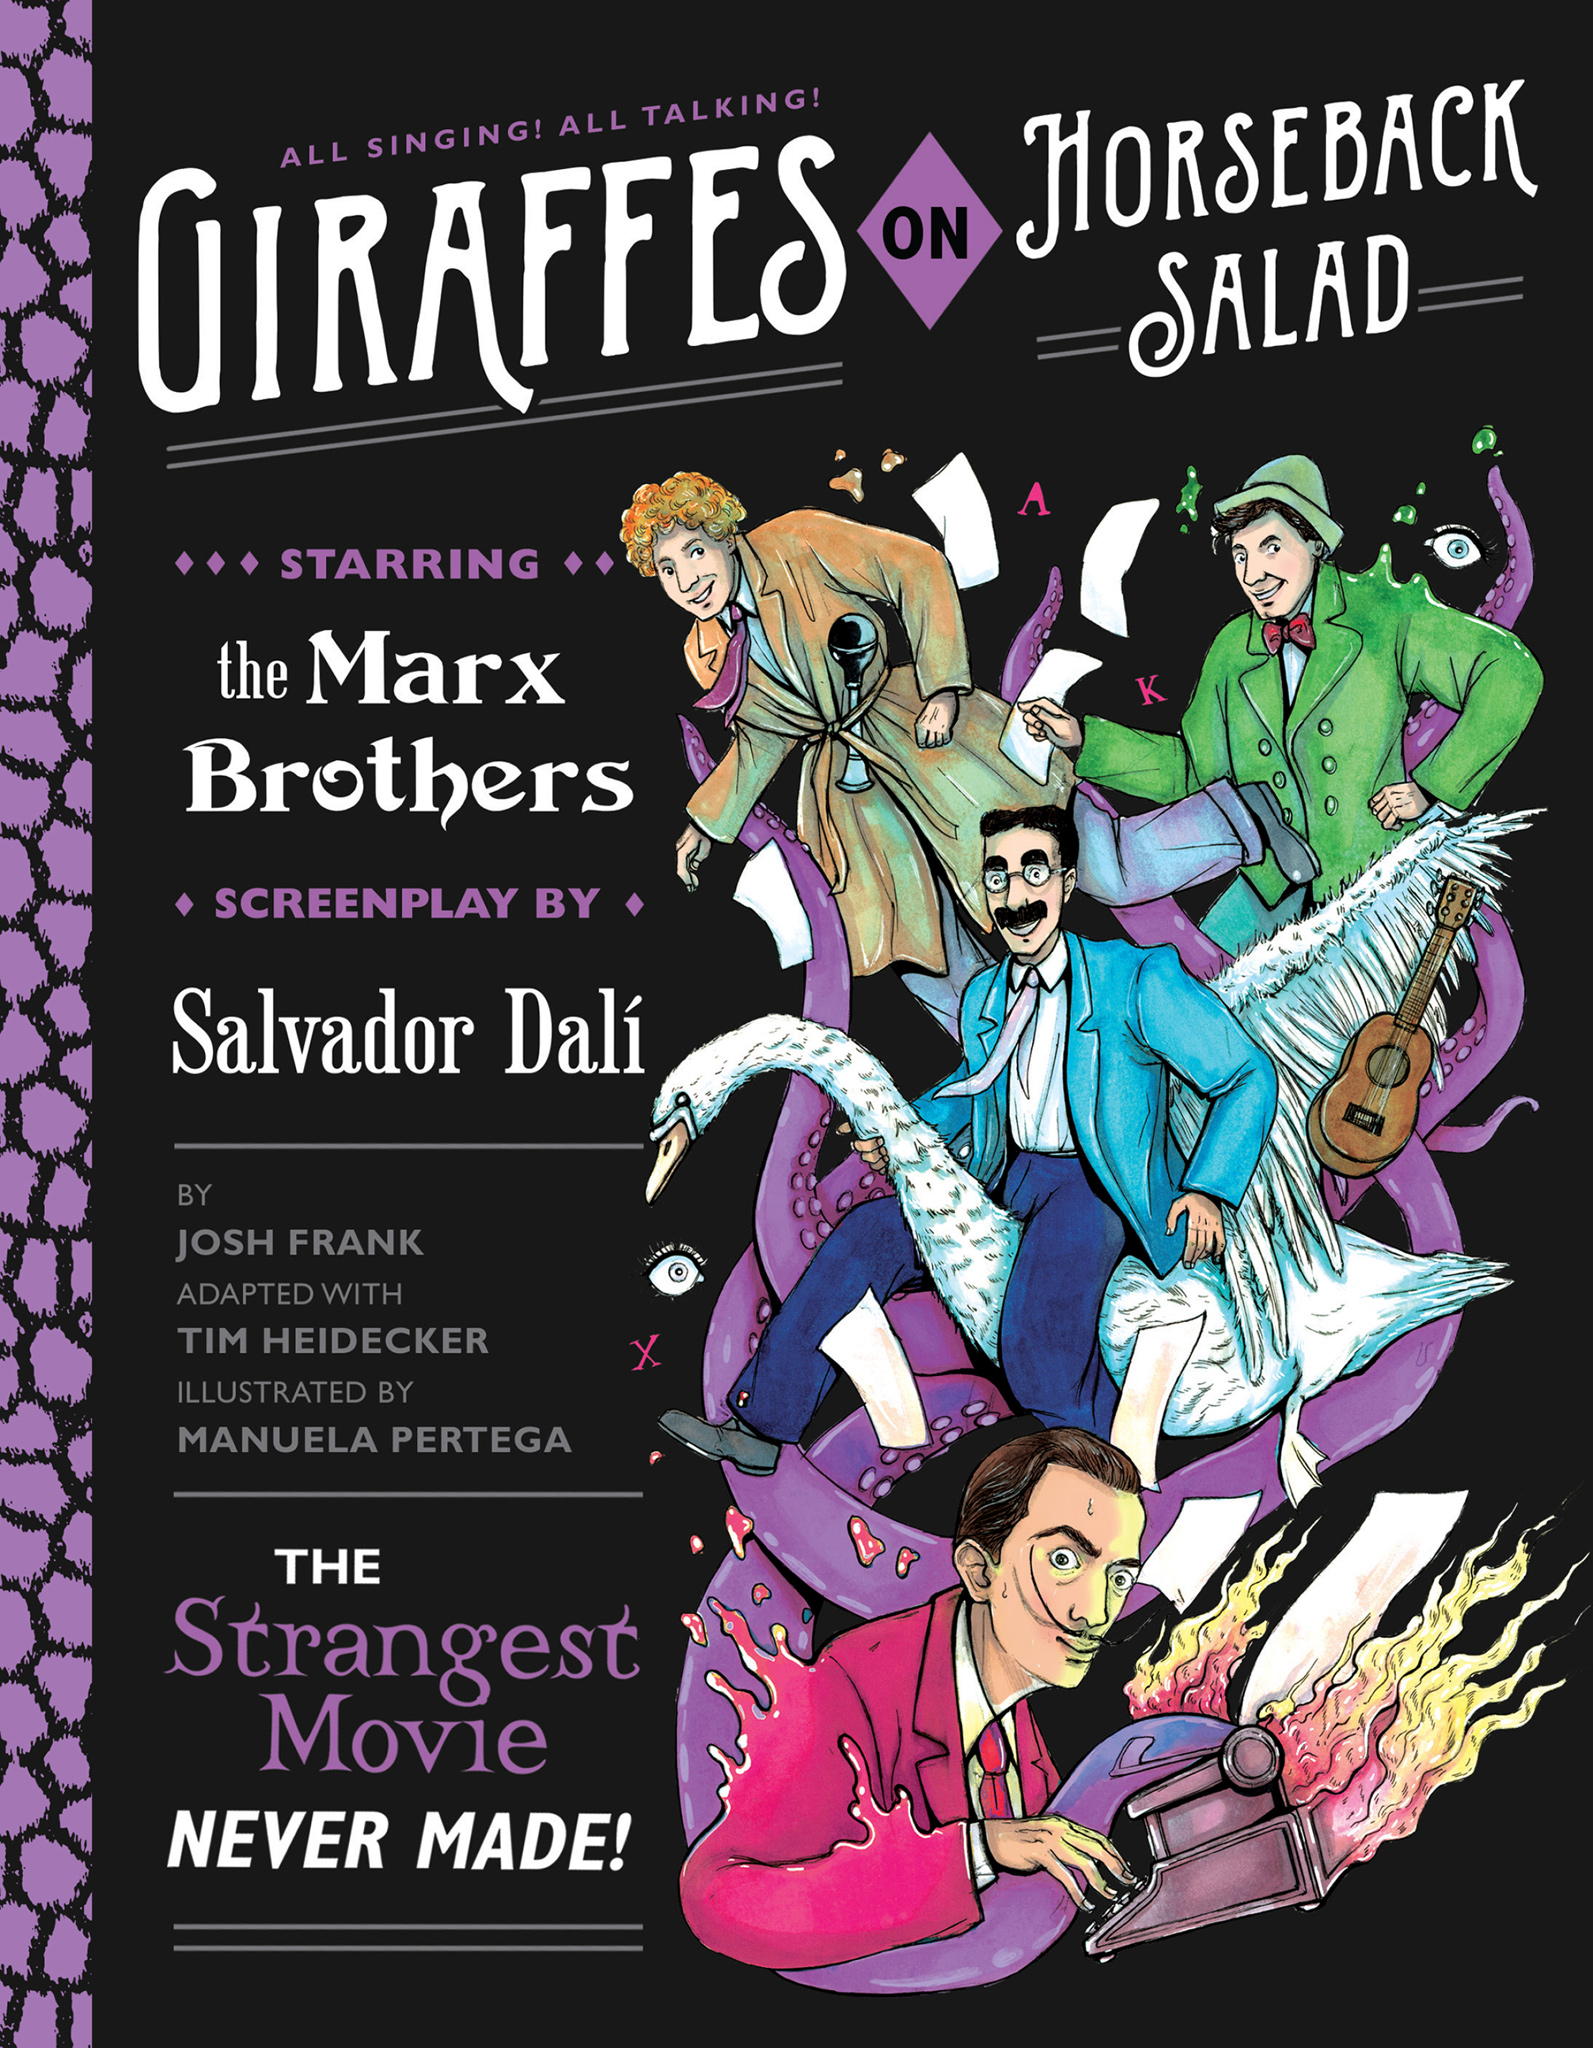 Read online Giraffes on Horseback Salad: Salvador Dali, the Marx Brothers, and the Strangest Movie Never Made comic -  Issue # TPB (Part 1) - 1